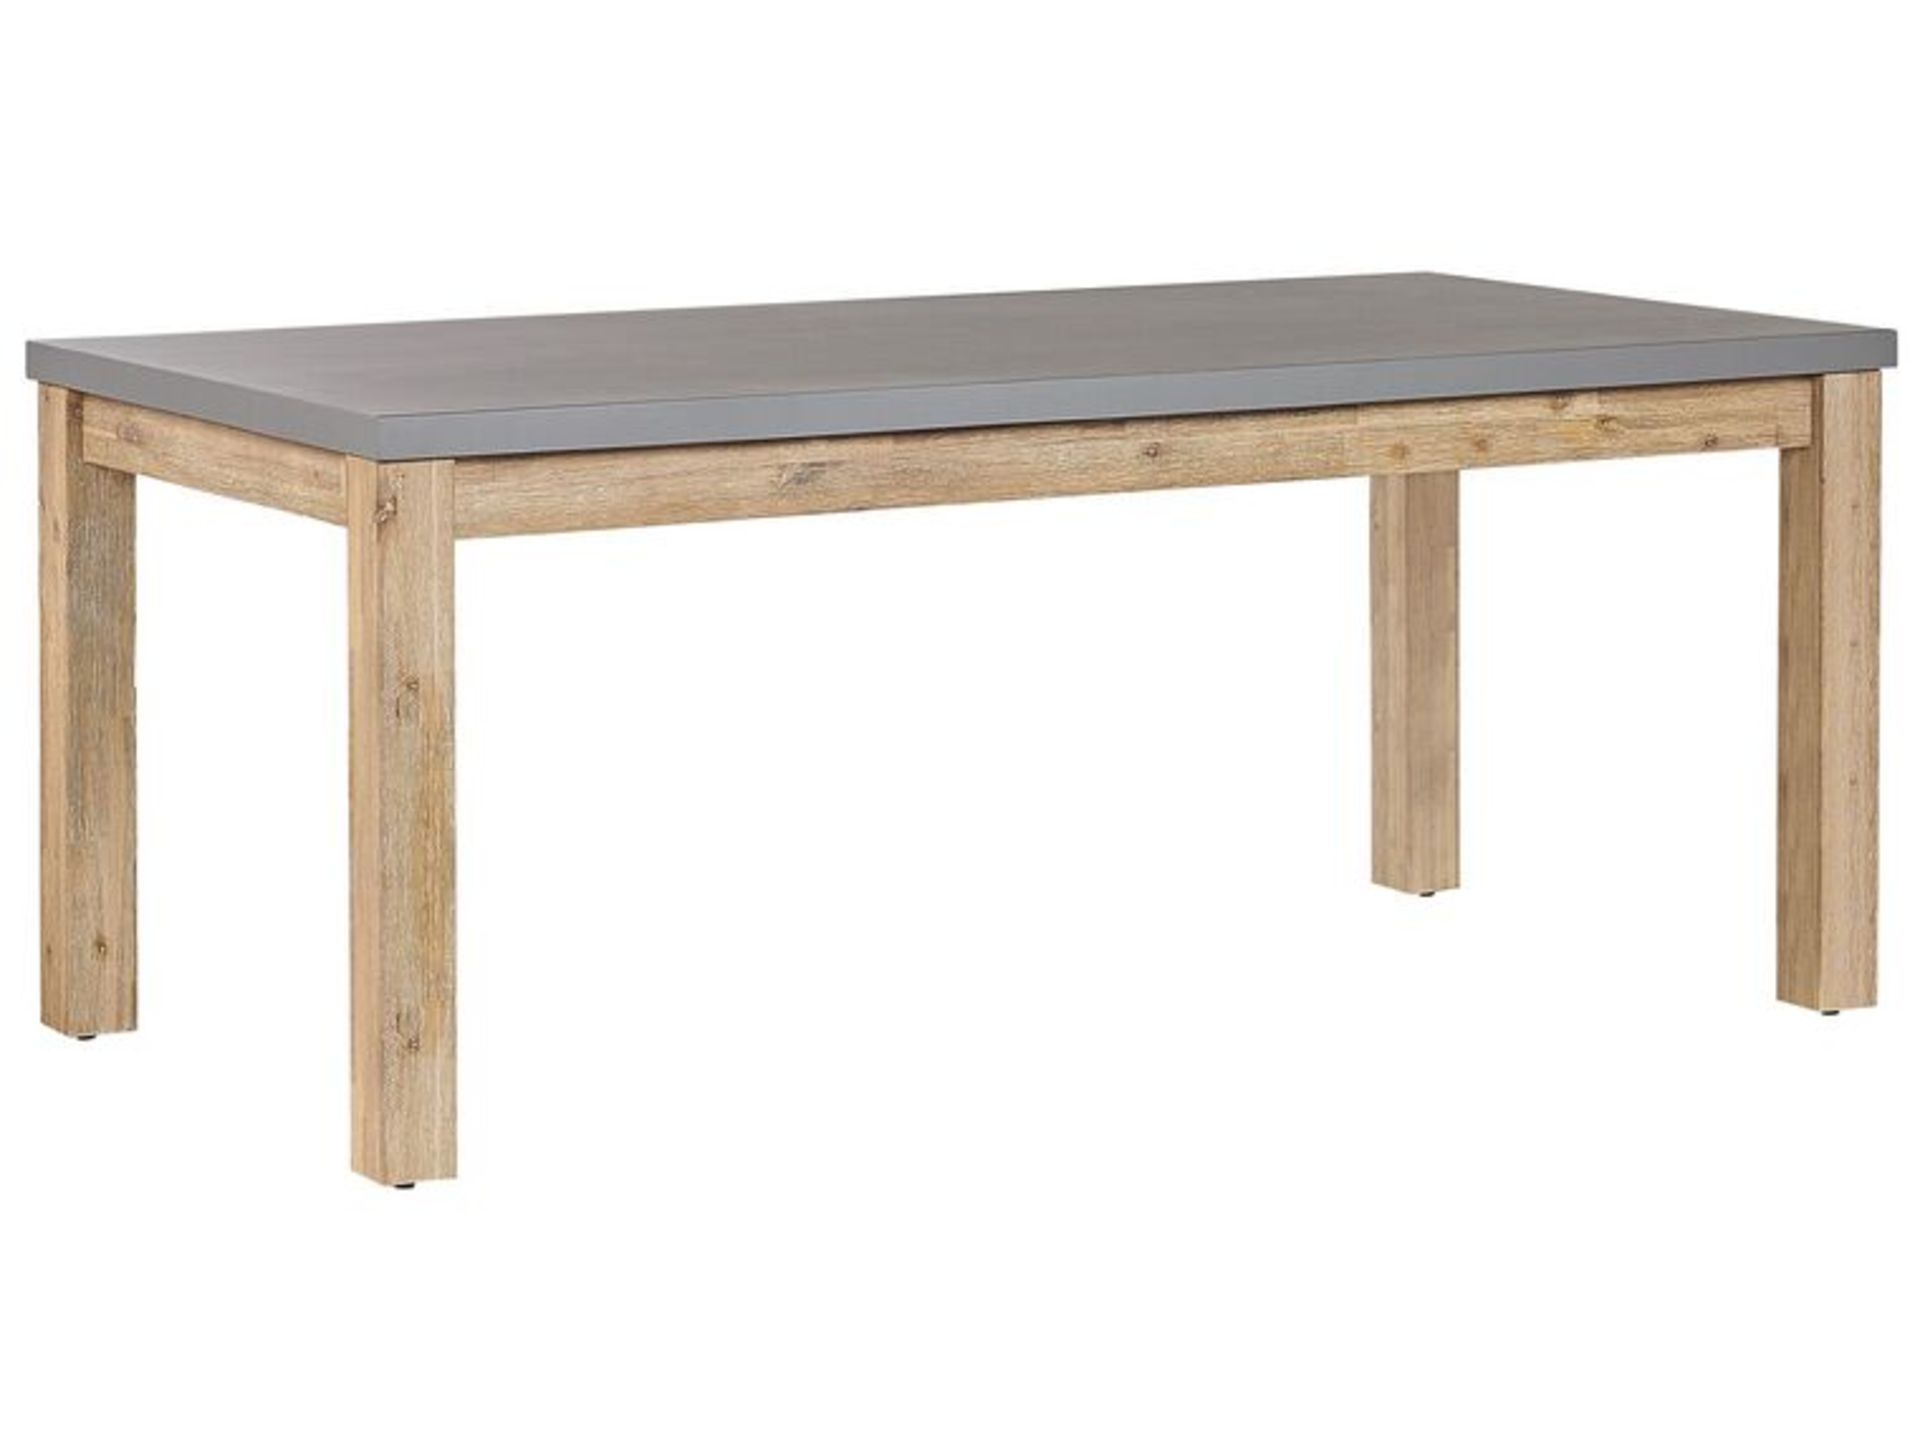 Ostuni Concrete Garden Table 180 x 90 cm Grey. - SR6. RRP £899.99. If you're keen on industrial